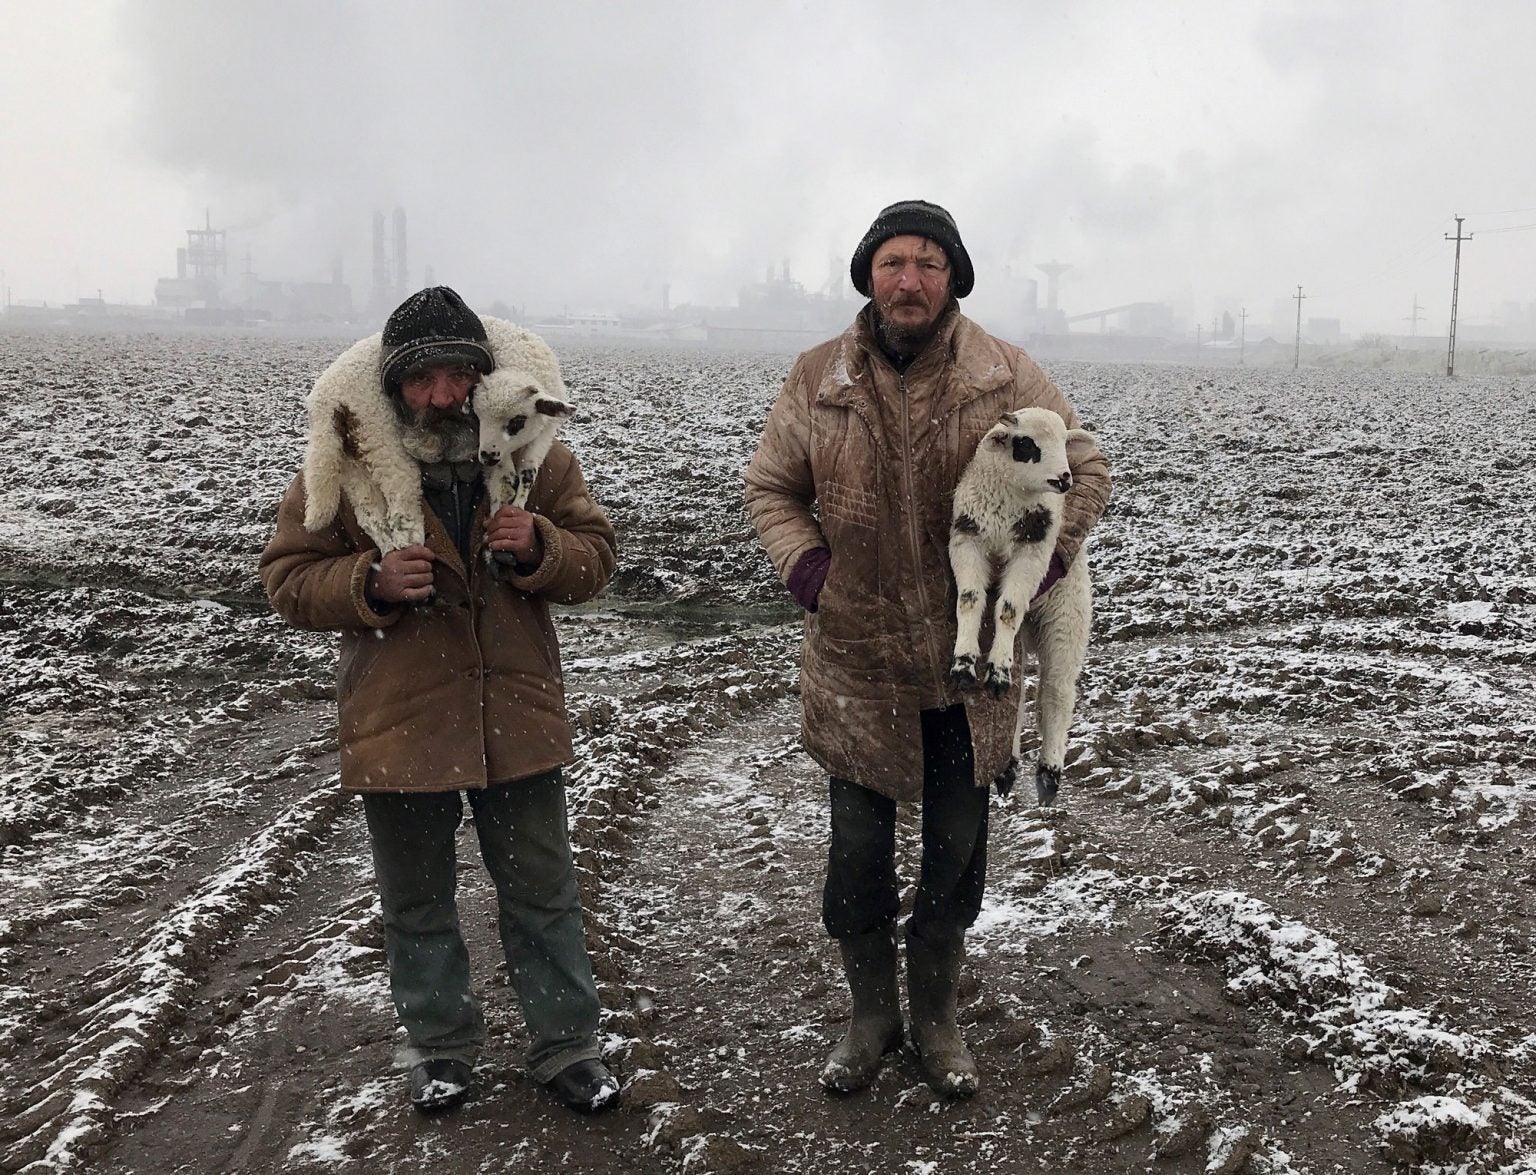 Transylvanian Shepherds, Shot on iPhone 7 by Targu Mures, Transylvania, Romania - And the 2021 iPhone Photography Awards go to... the iPhone 7